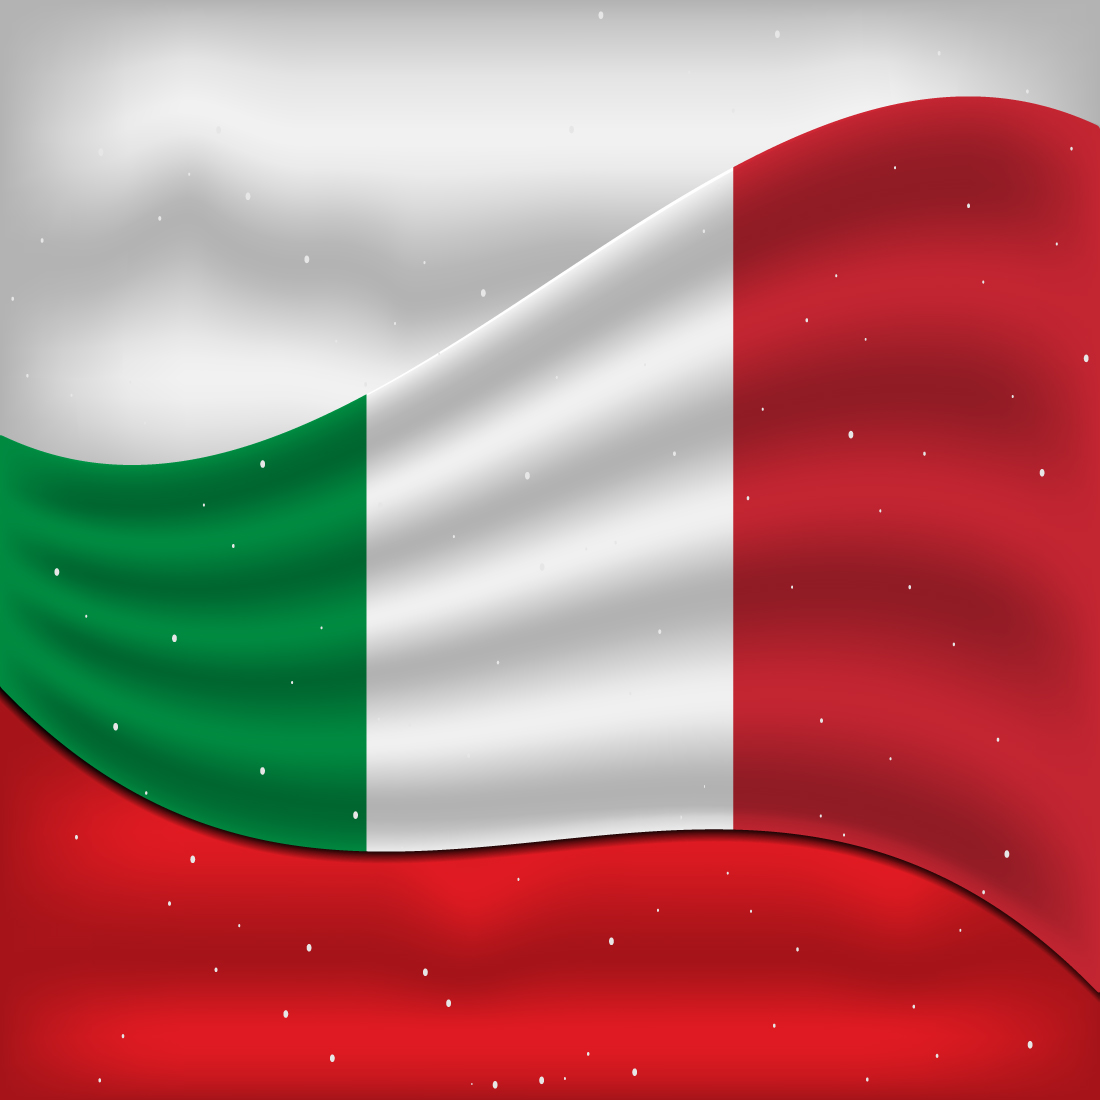 Exquisite image of the flag of Italy.